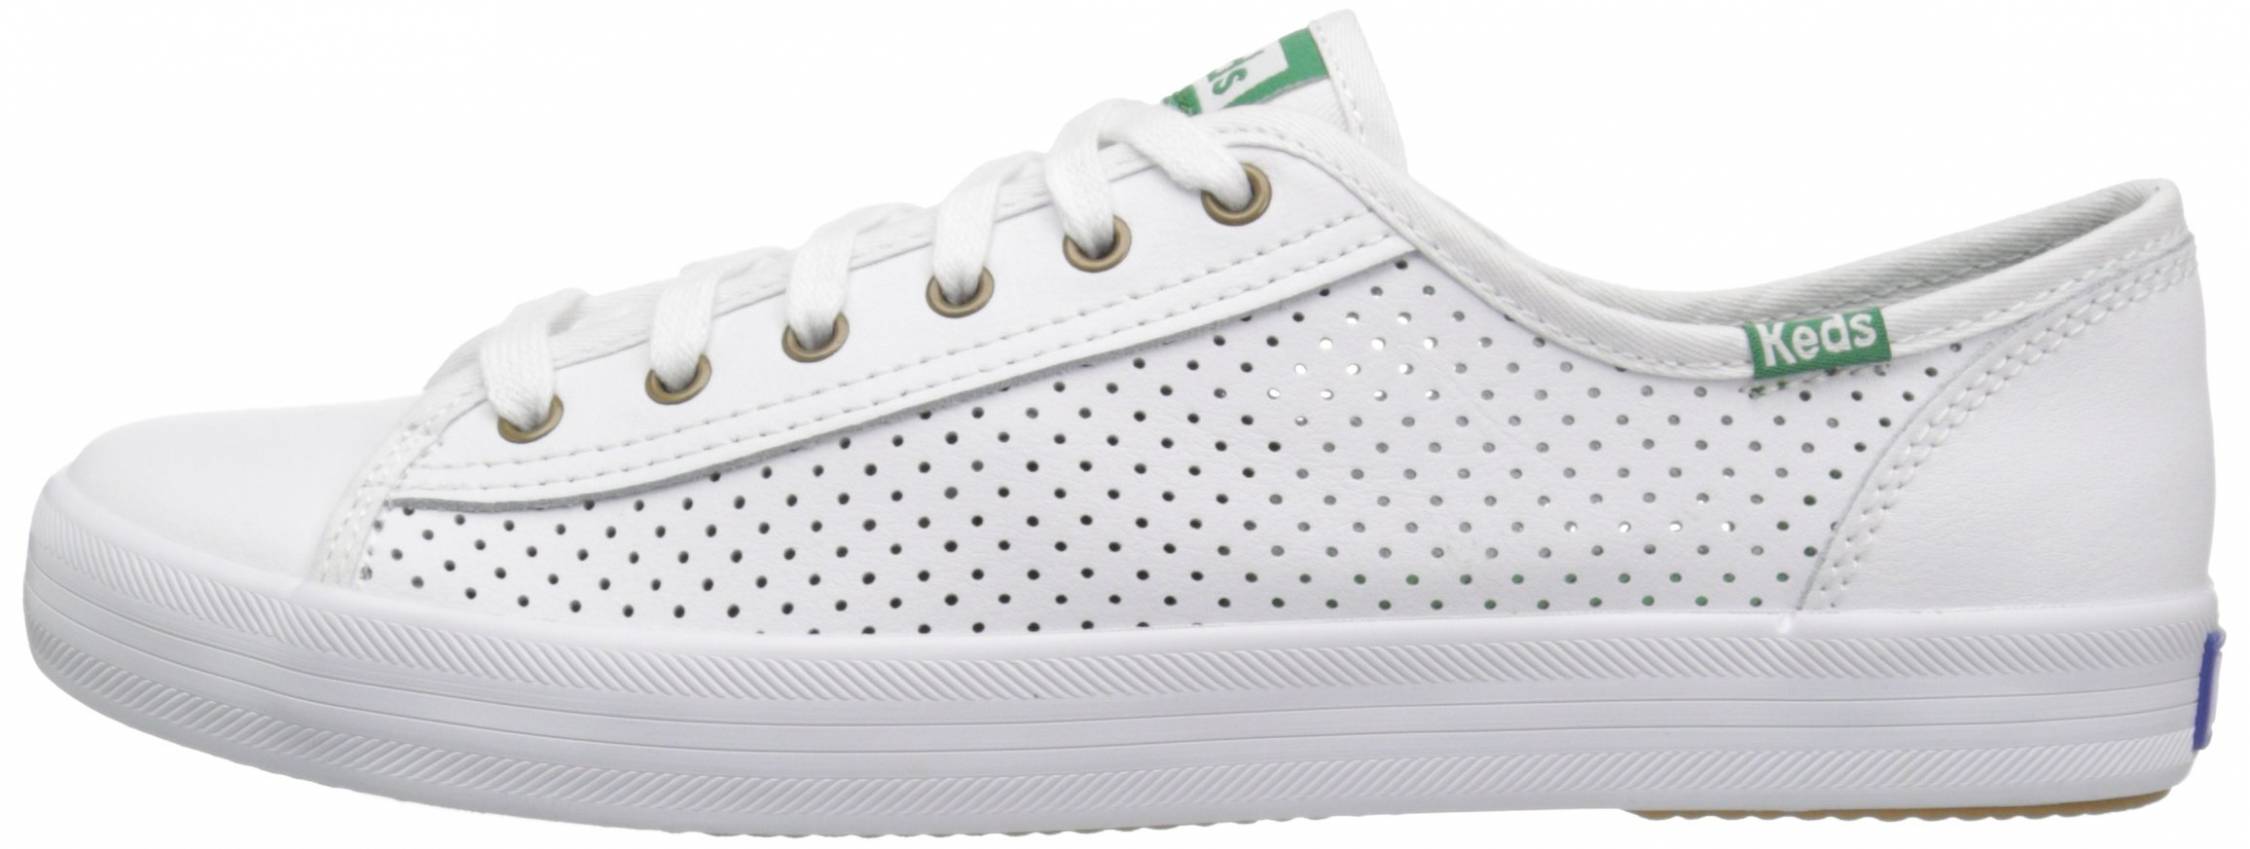 keds white leather womens sneakers